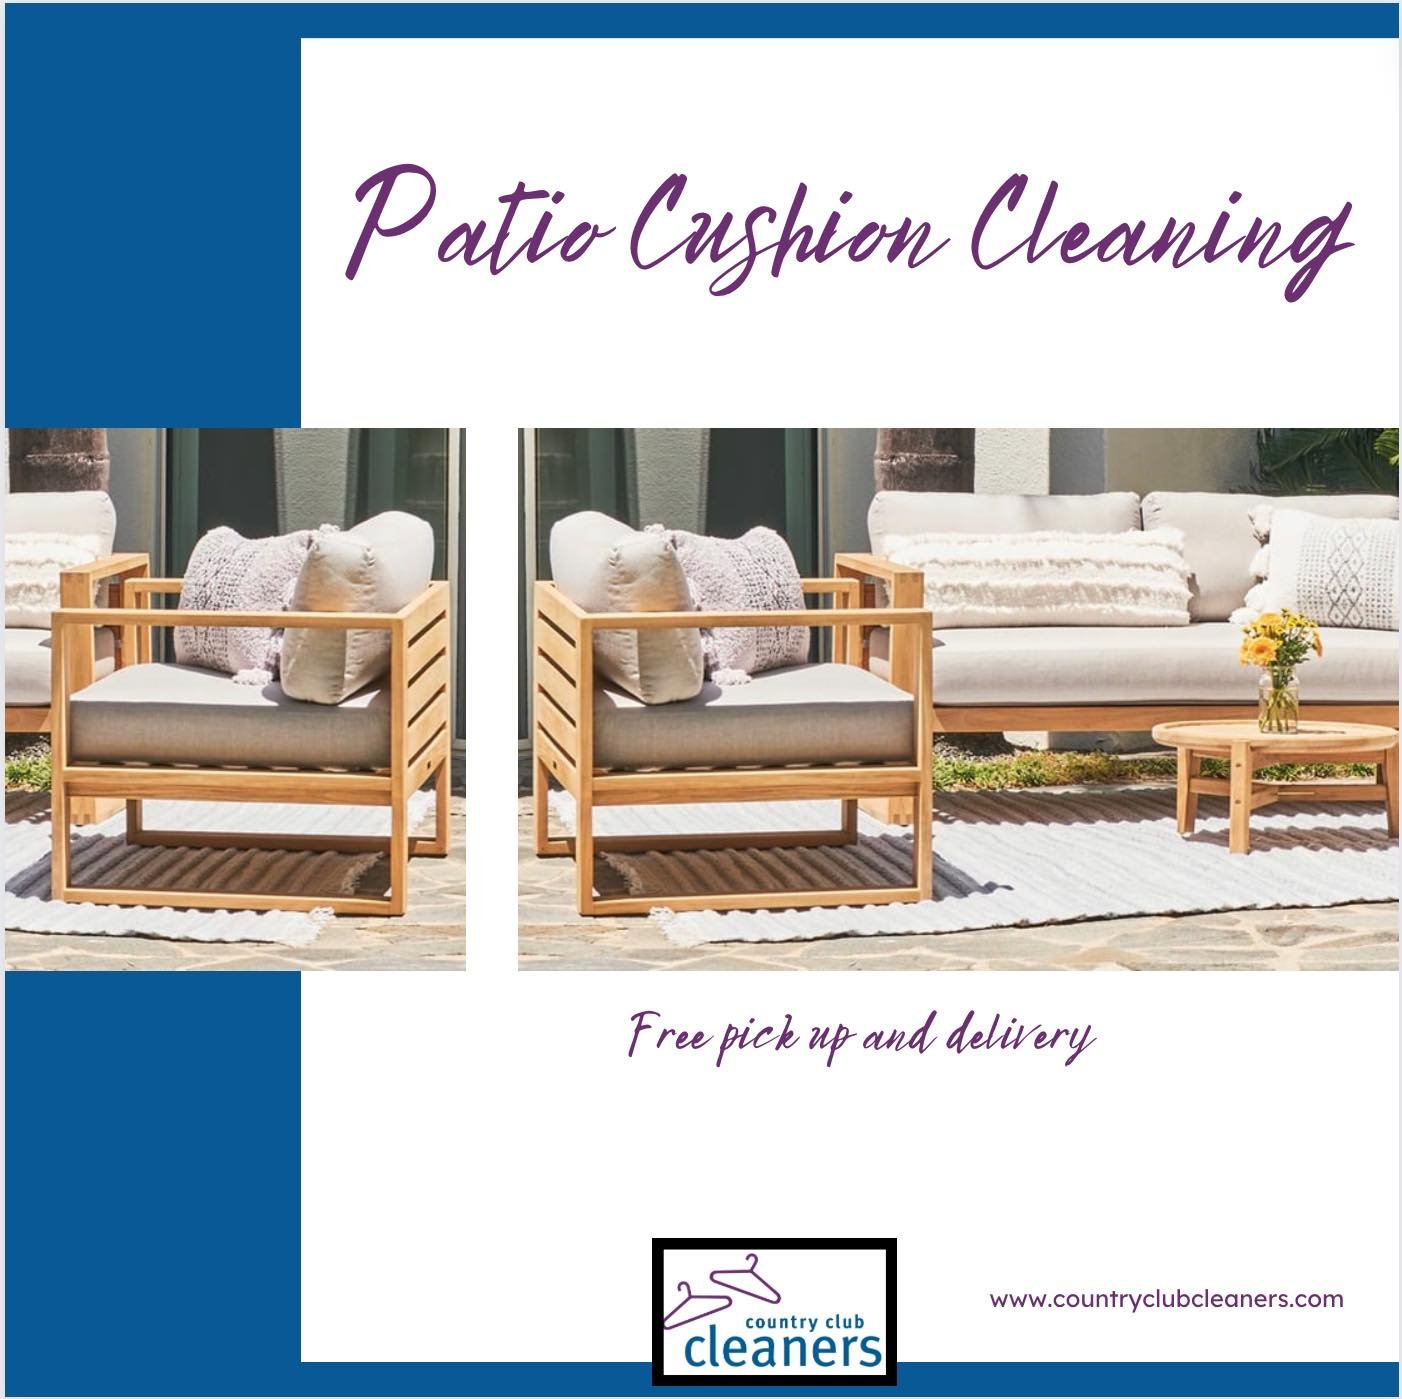 Get your backyard ready for summer with our patio cushion cleaning service! We provide free pick up and delivery! 

#patiocushioncleaning #CountryClubCleaners #freepickupanddelivery #backyardoasis 
#backyardreadyforsummer